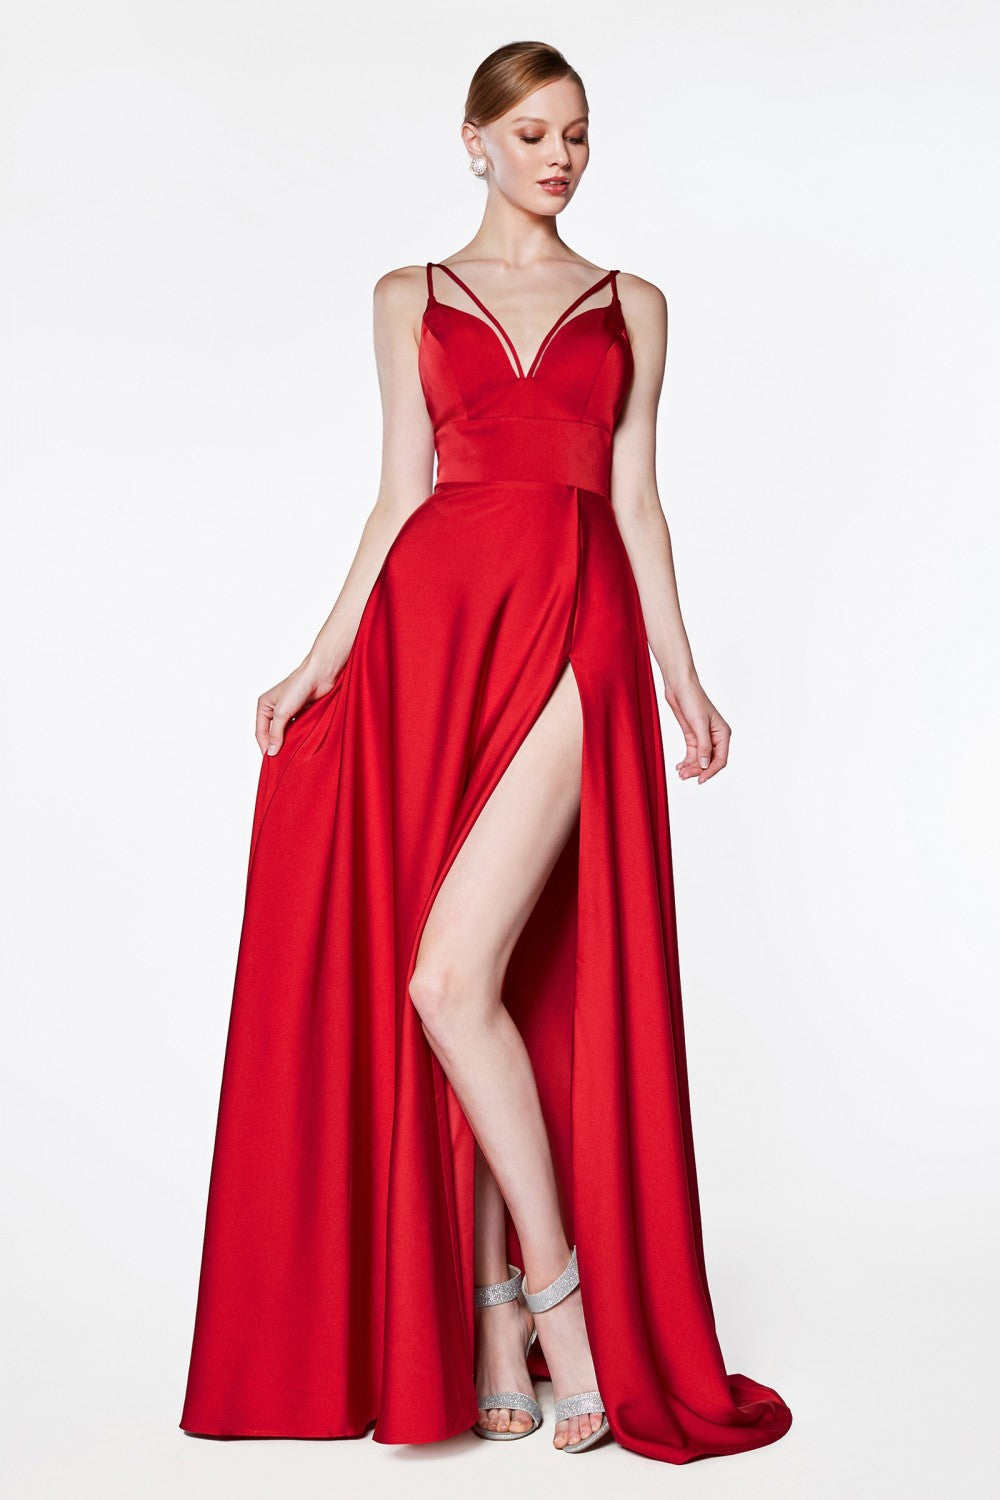 Classic A-line Ball & Prom Gown V-neckline Open Back Bodice with Double Criss Cross Straps Reckless High Leg Slit CDCS034 Elsy Style Evening Dress